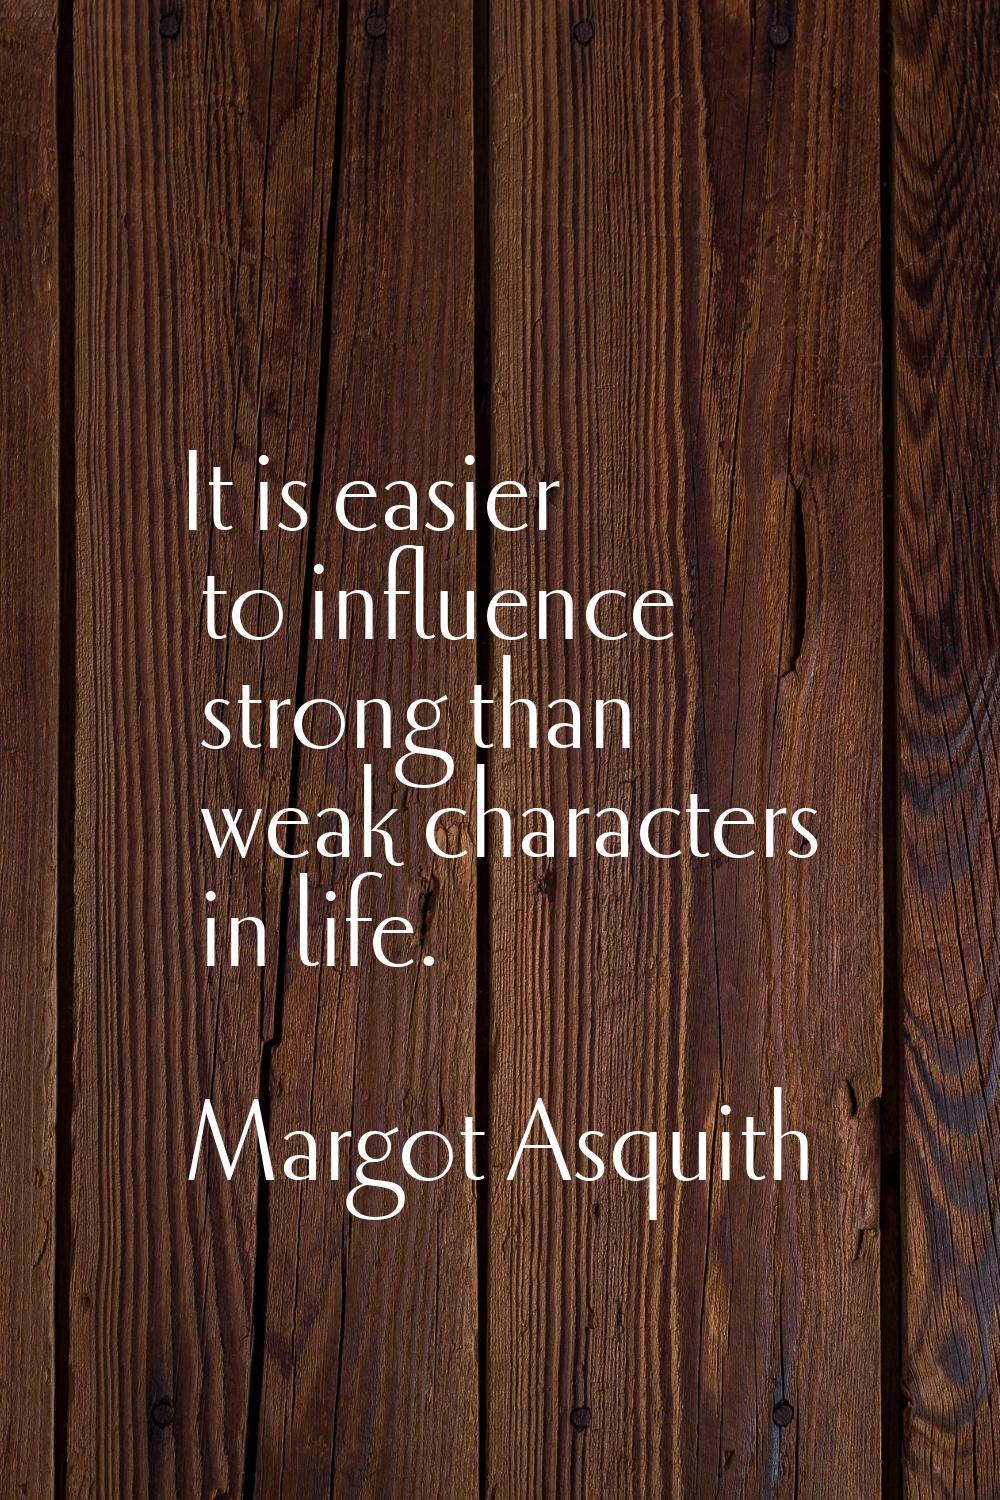 It is easier to influence strong than weak characters in life.